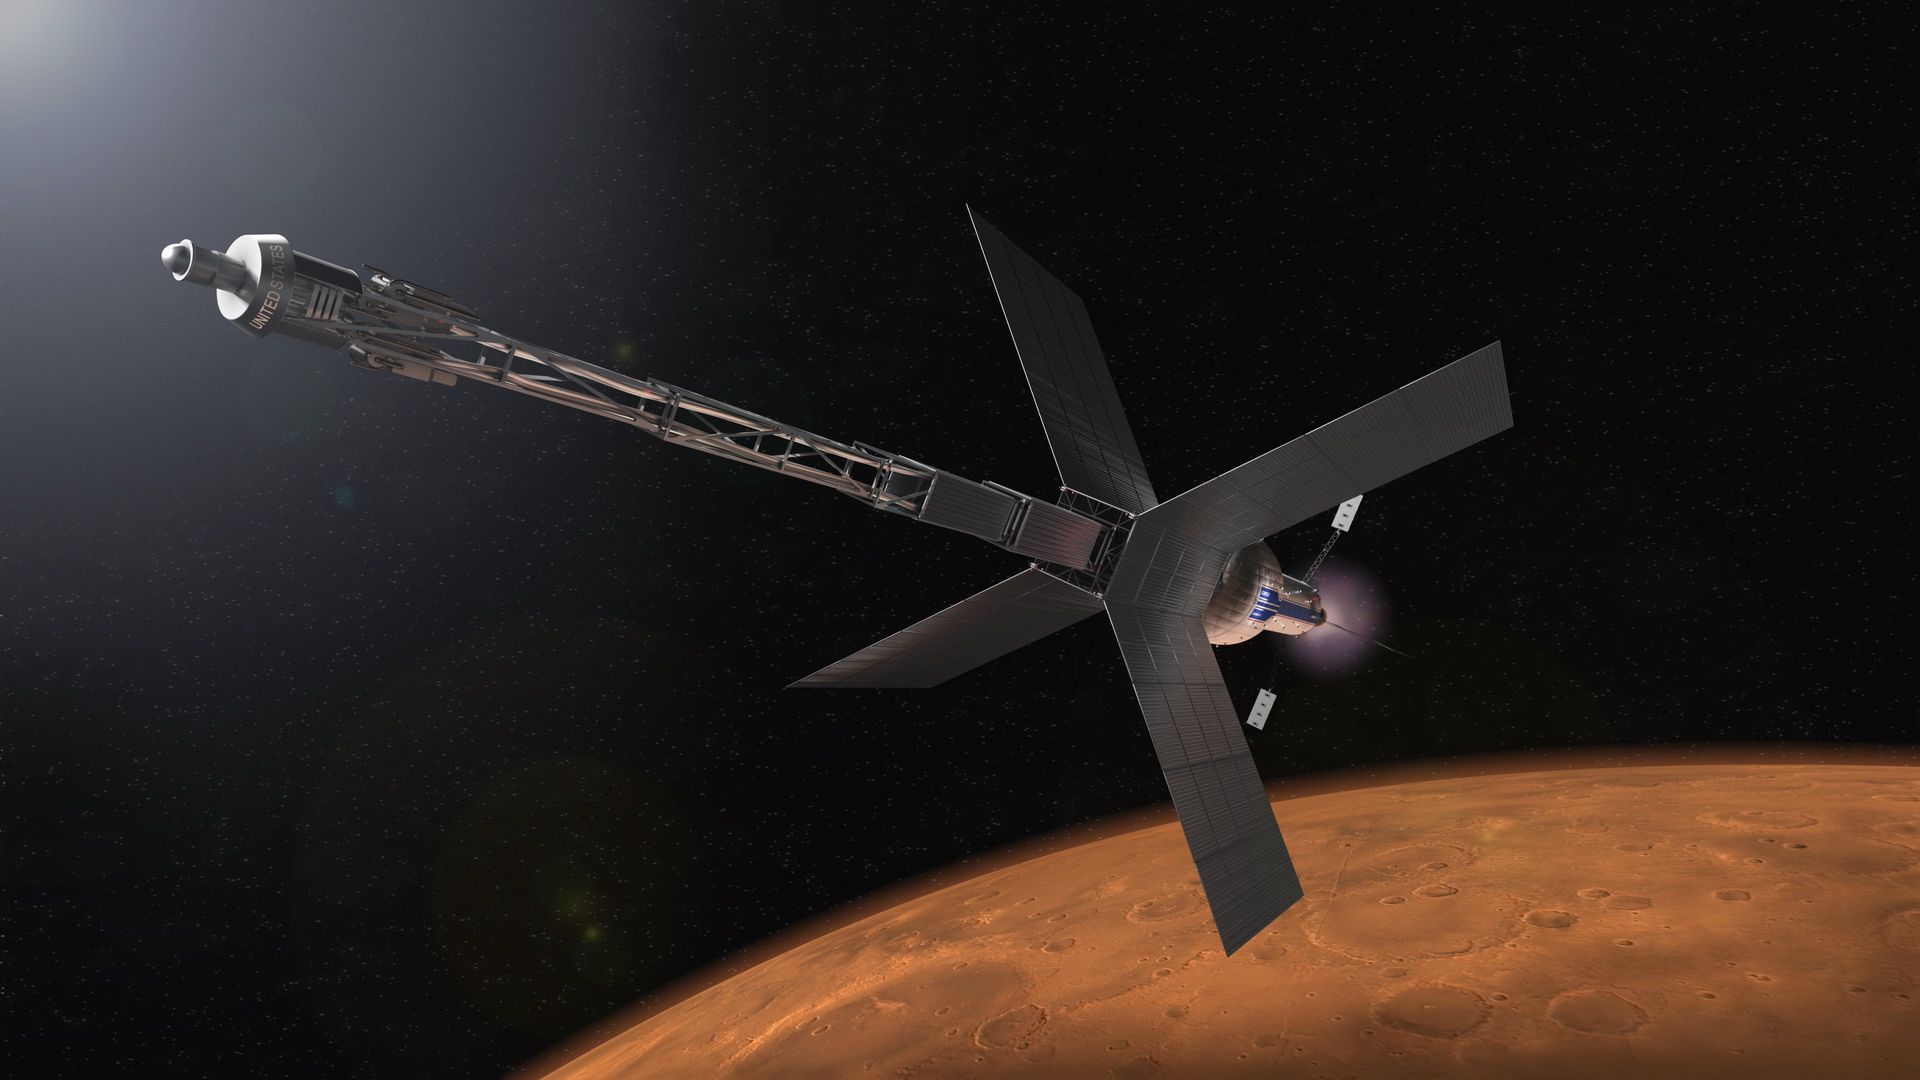 Artist's illustration of a spacecraft with solar power cells in the shape of an X off a long, skinny body in orbit around Mars